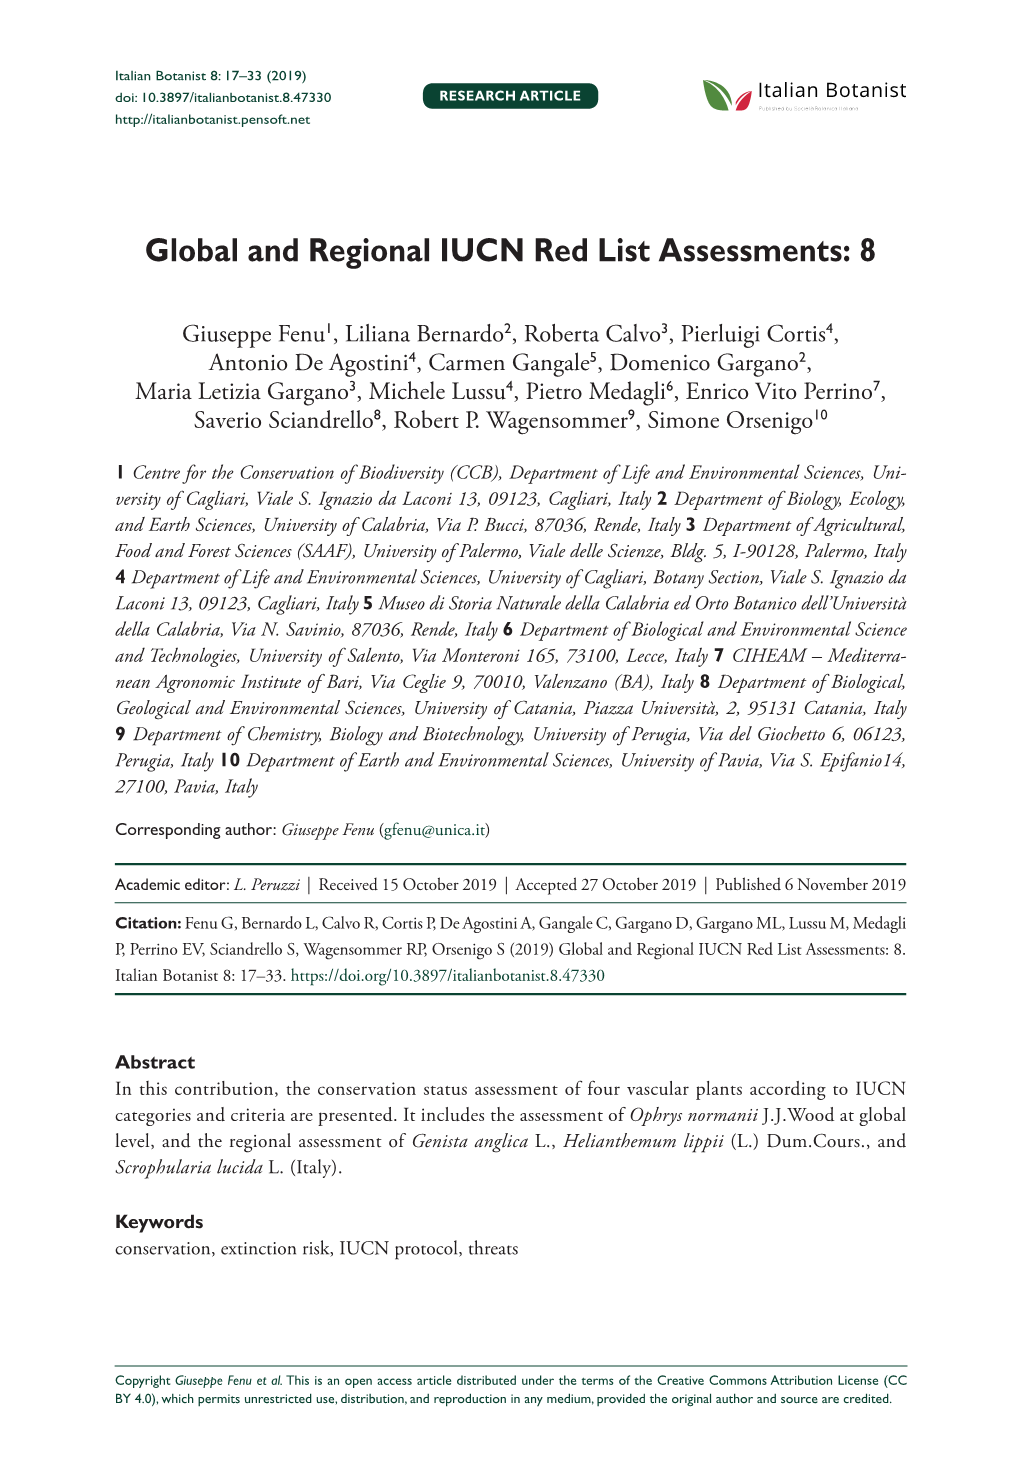 Global and Regional IUCN Red List Assessments: 8 17 Doi: 10.3897/Italianbotanist.8.47330 RESEARCH ARTICLE